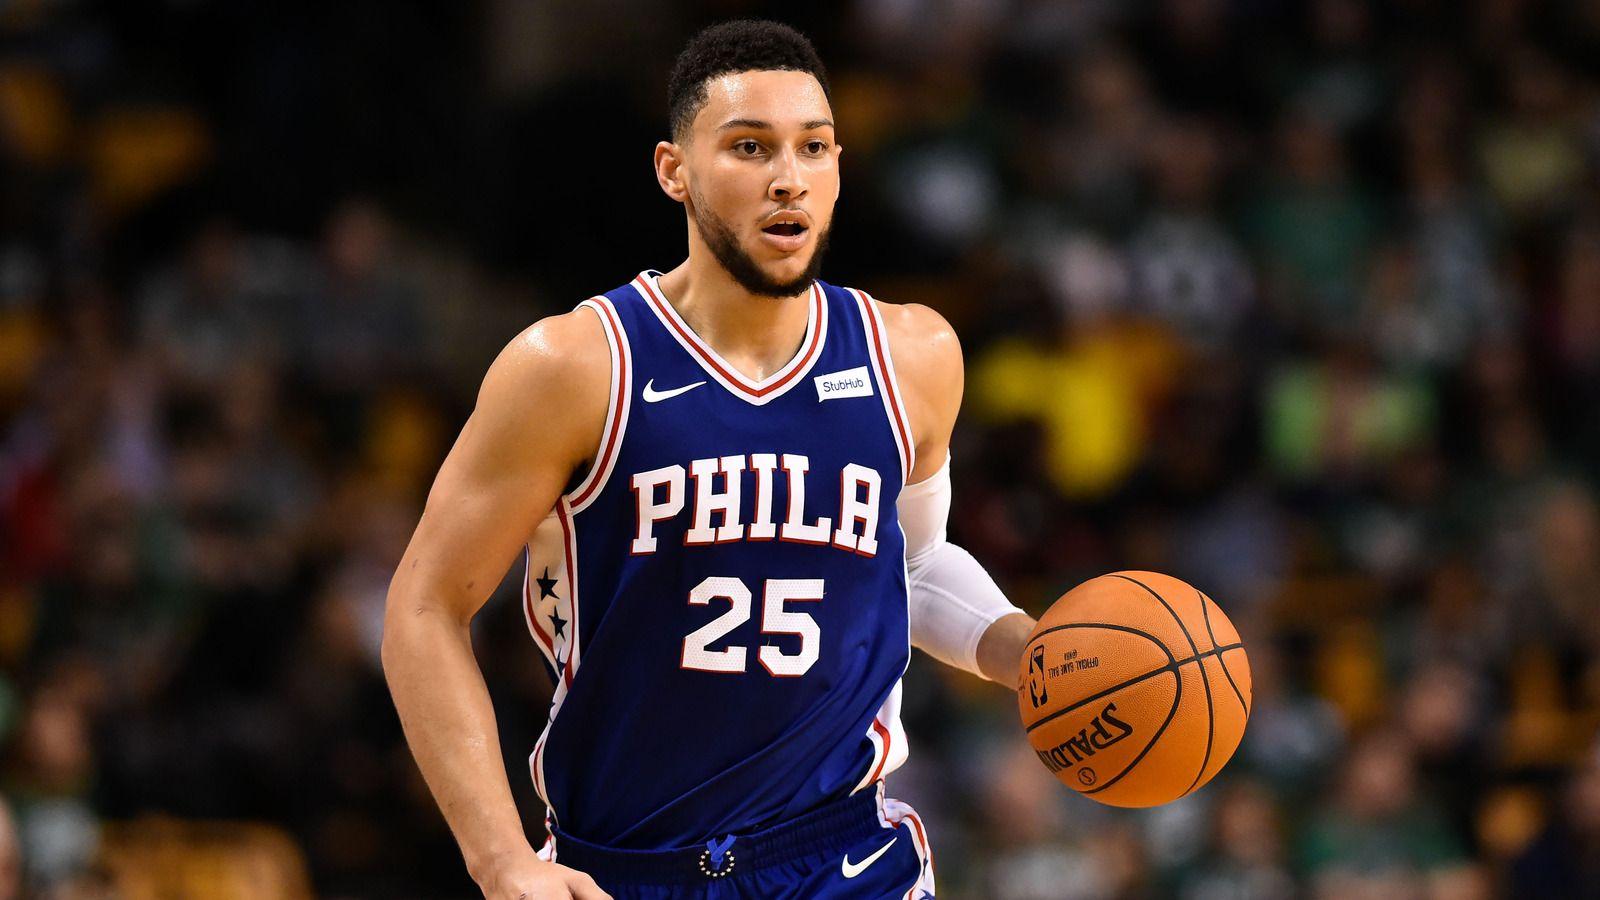 So who are these Philadelphia 76ers really?